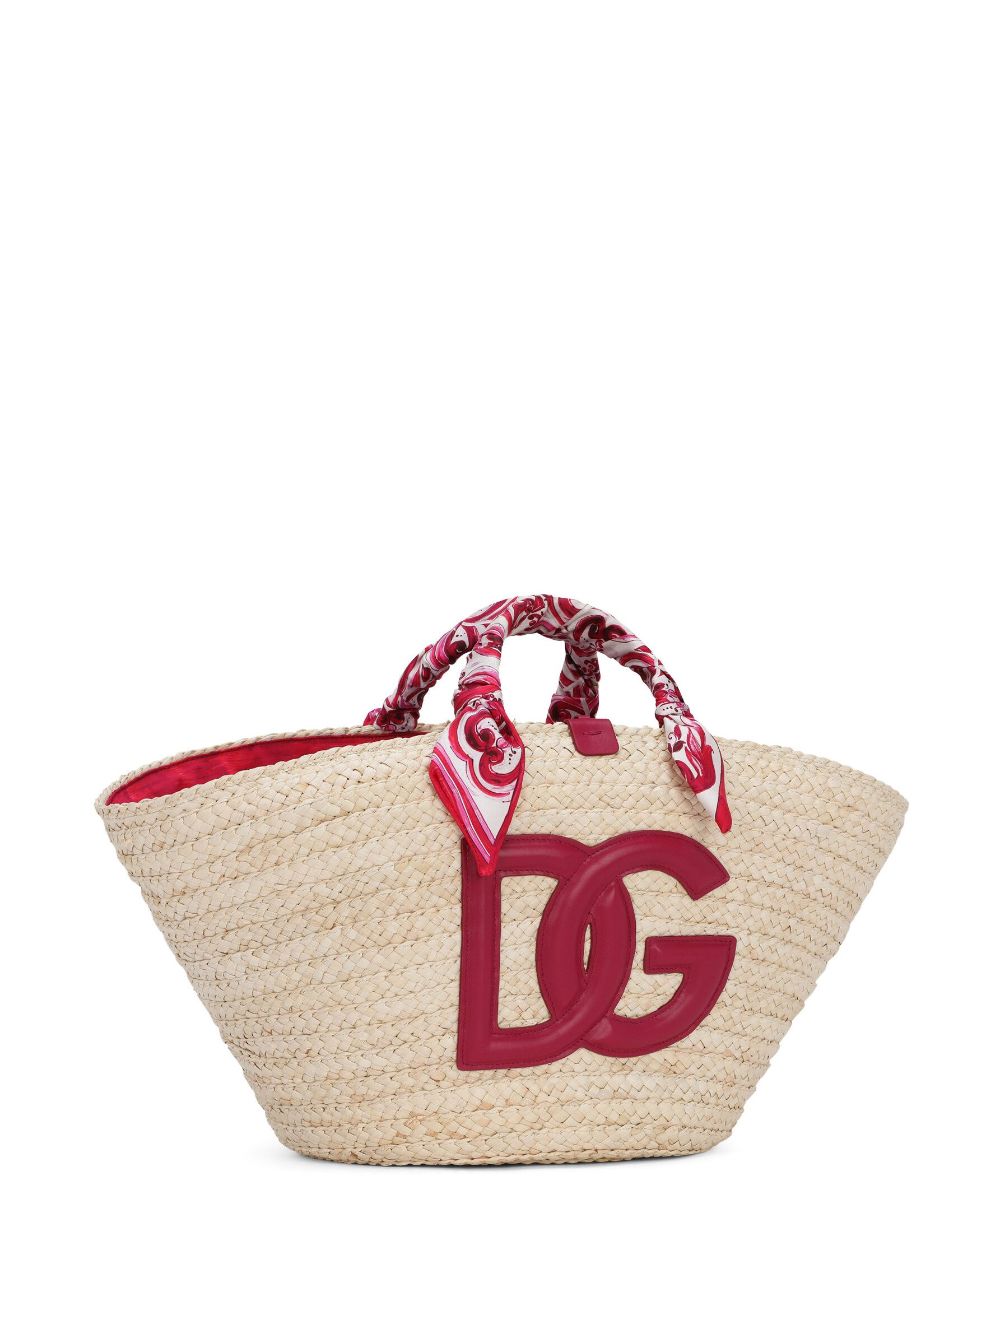 DOLCE & GABBANA "Fuchsia Silk and Leather Interwoven Large Tote with Scarf-Wrapped Handles